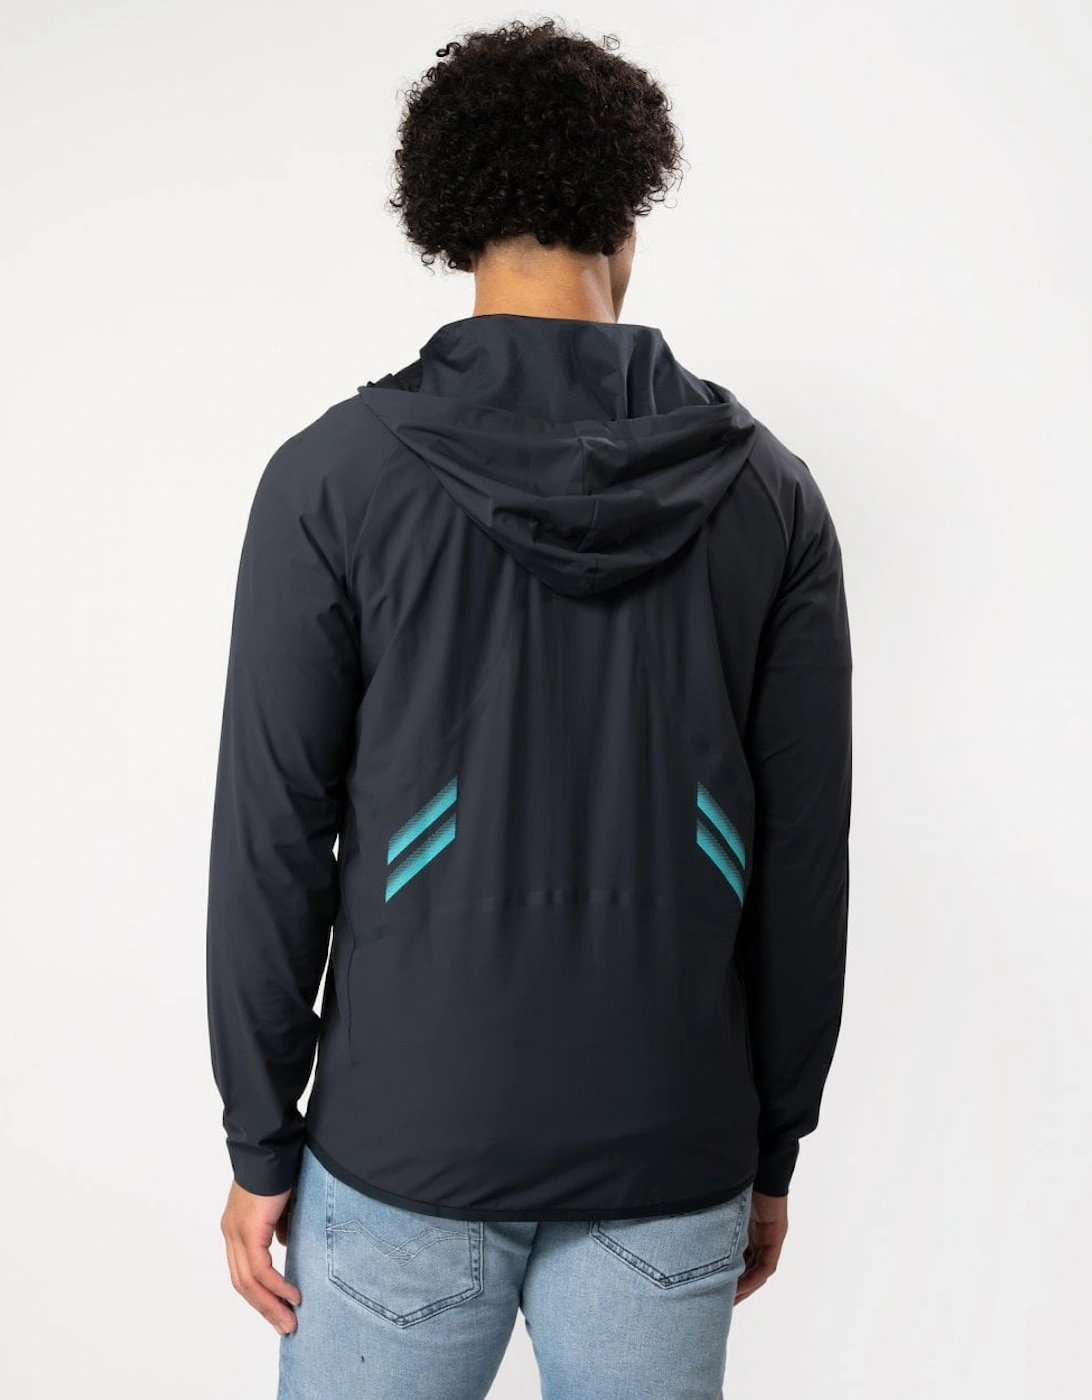 BOSS Green Sicon Active 1 Mens Zip-Up Hoodie with Decorative Reflective Details